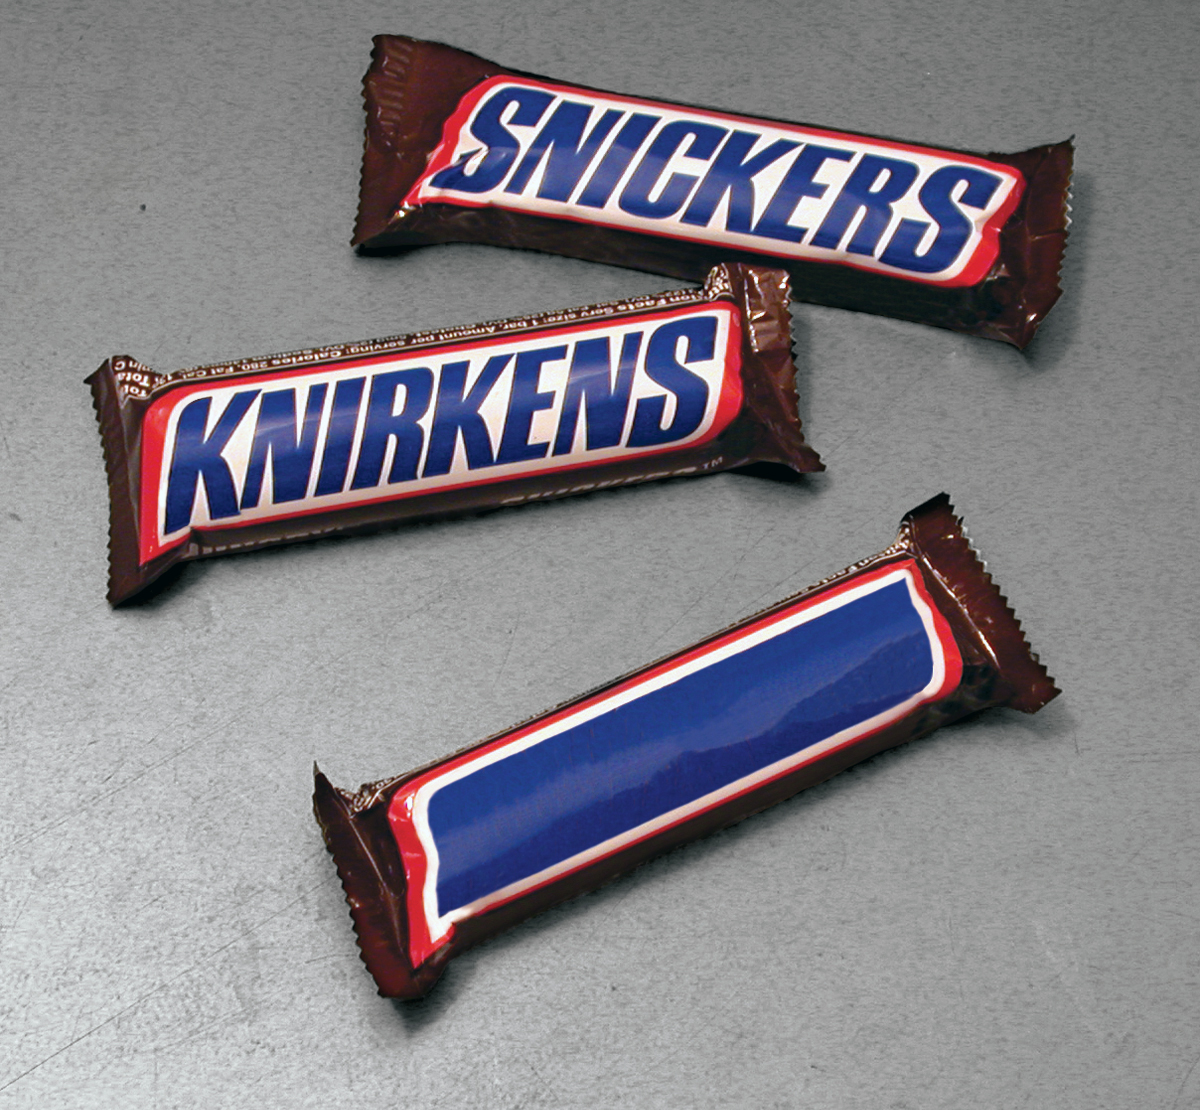 snickers_mockup02-1